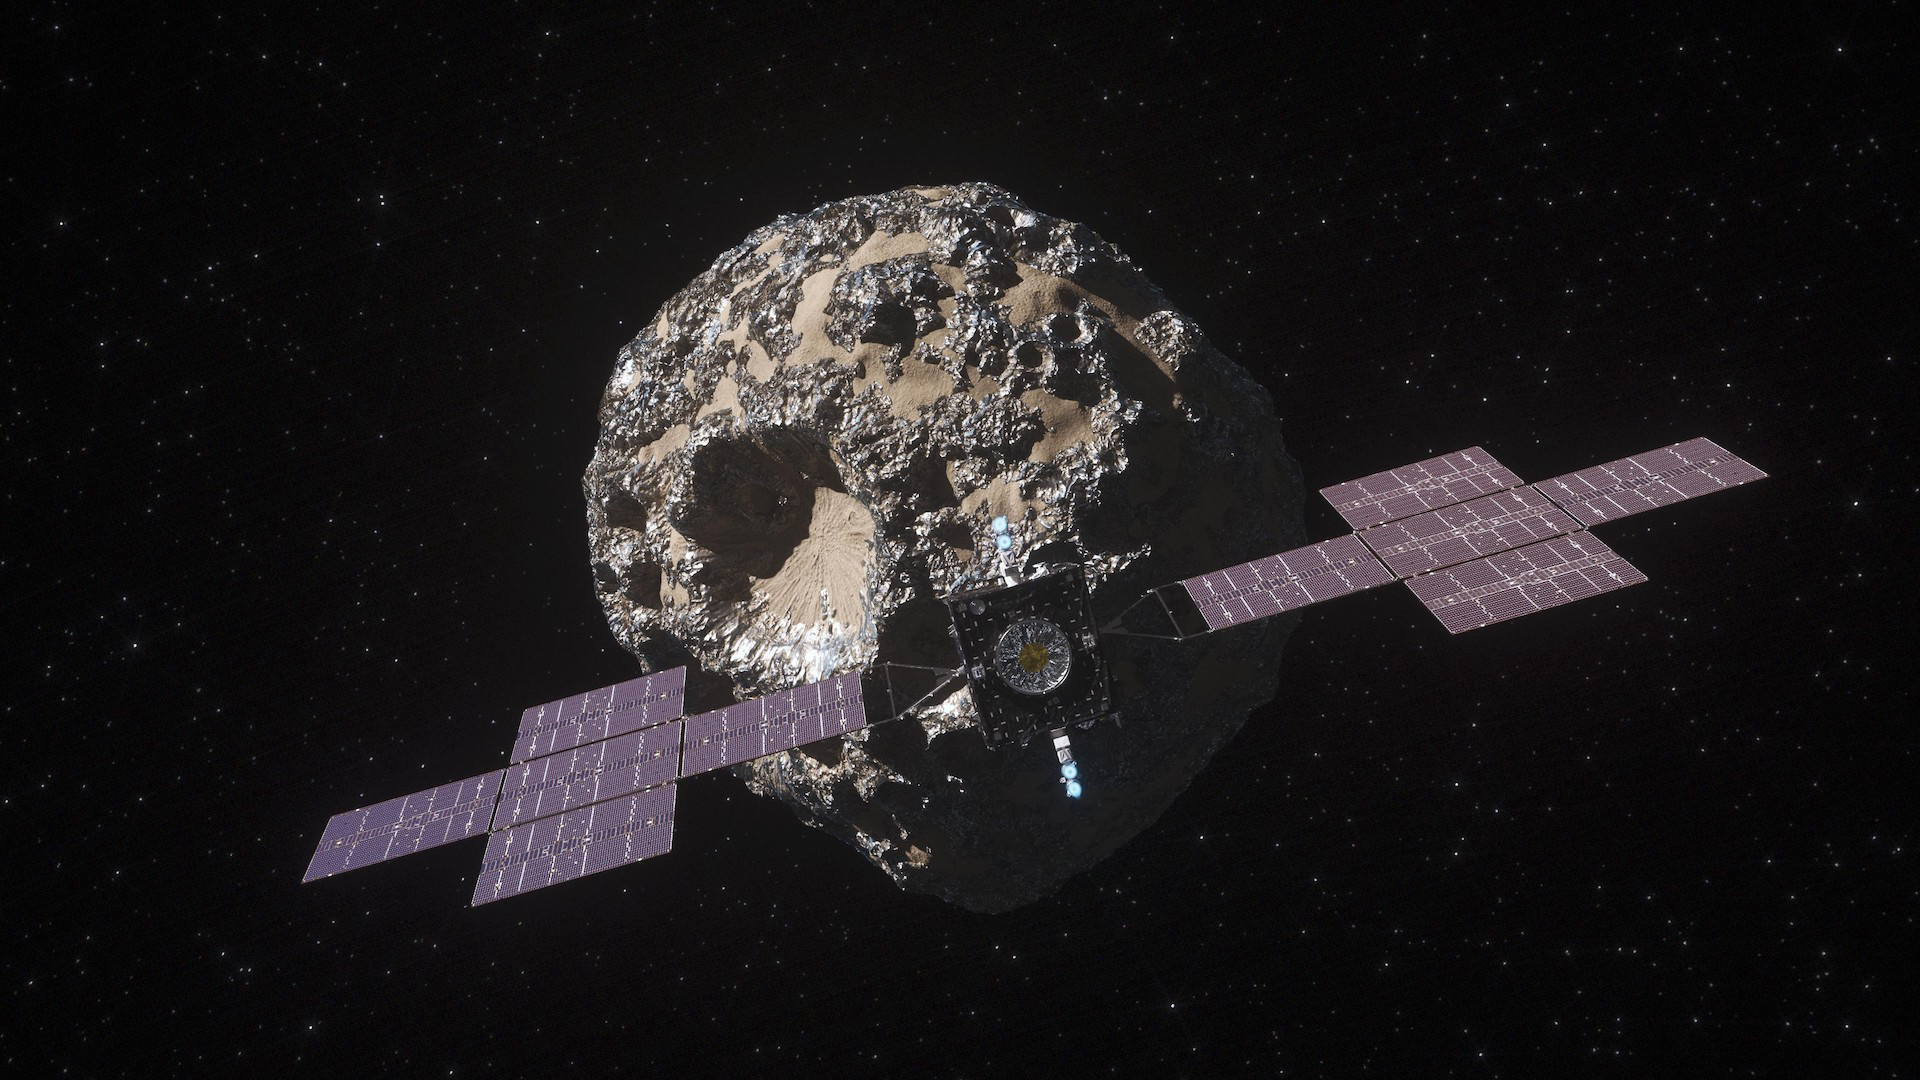 Illustration of NASA's Psyche spacecraft approaching the asteroid 16 Psyche in 2029.